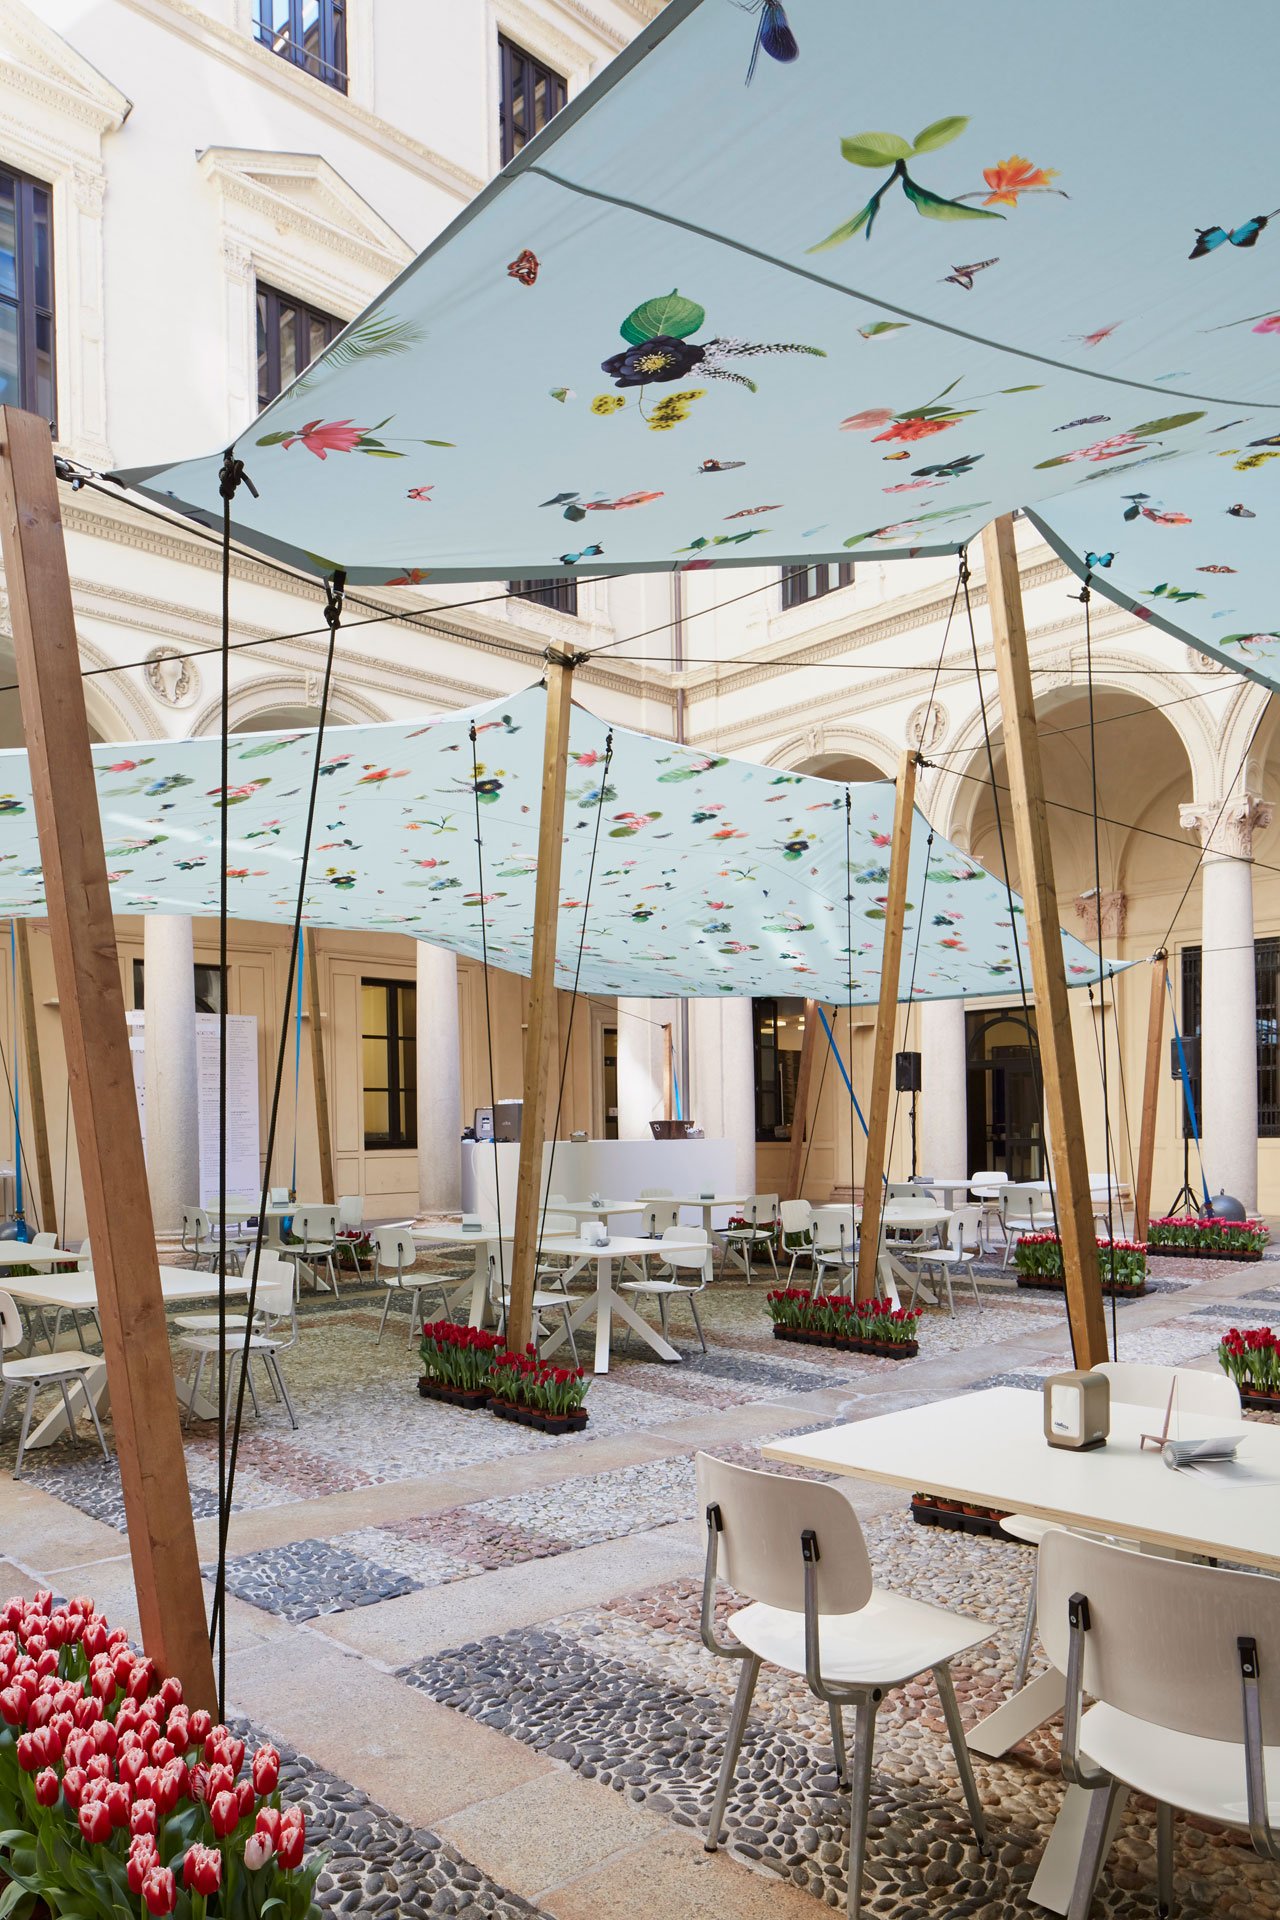 This year Nicole Uniquole, curator at Masterly – The Dutch in Milano, commissioned Edward van Vliet for the design of the lively courtyard at the Palazzo Francesco Turati. 